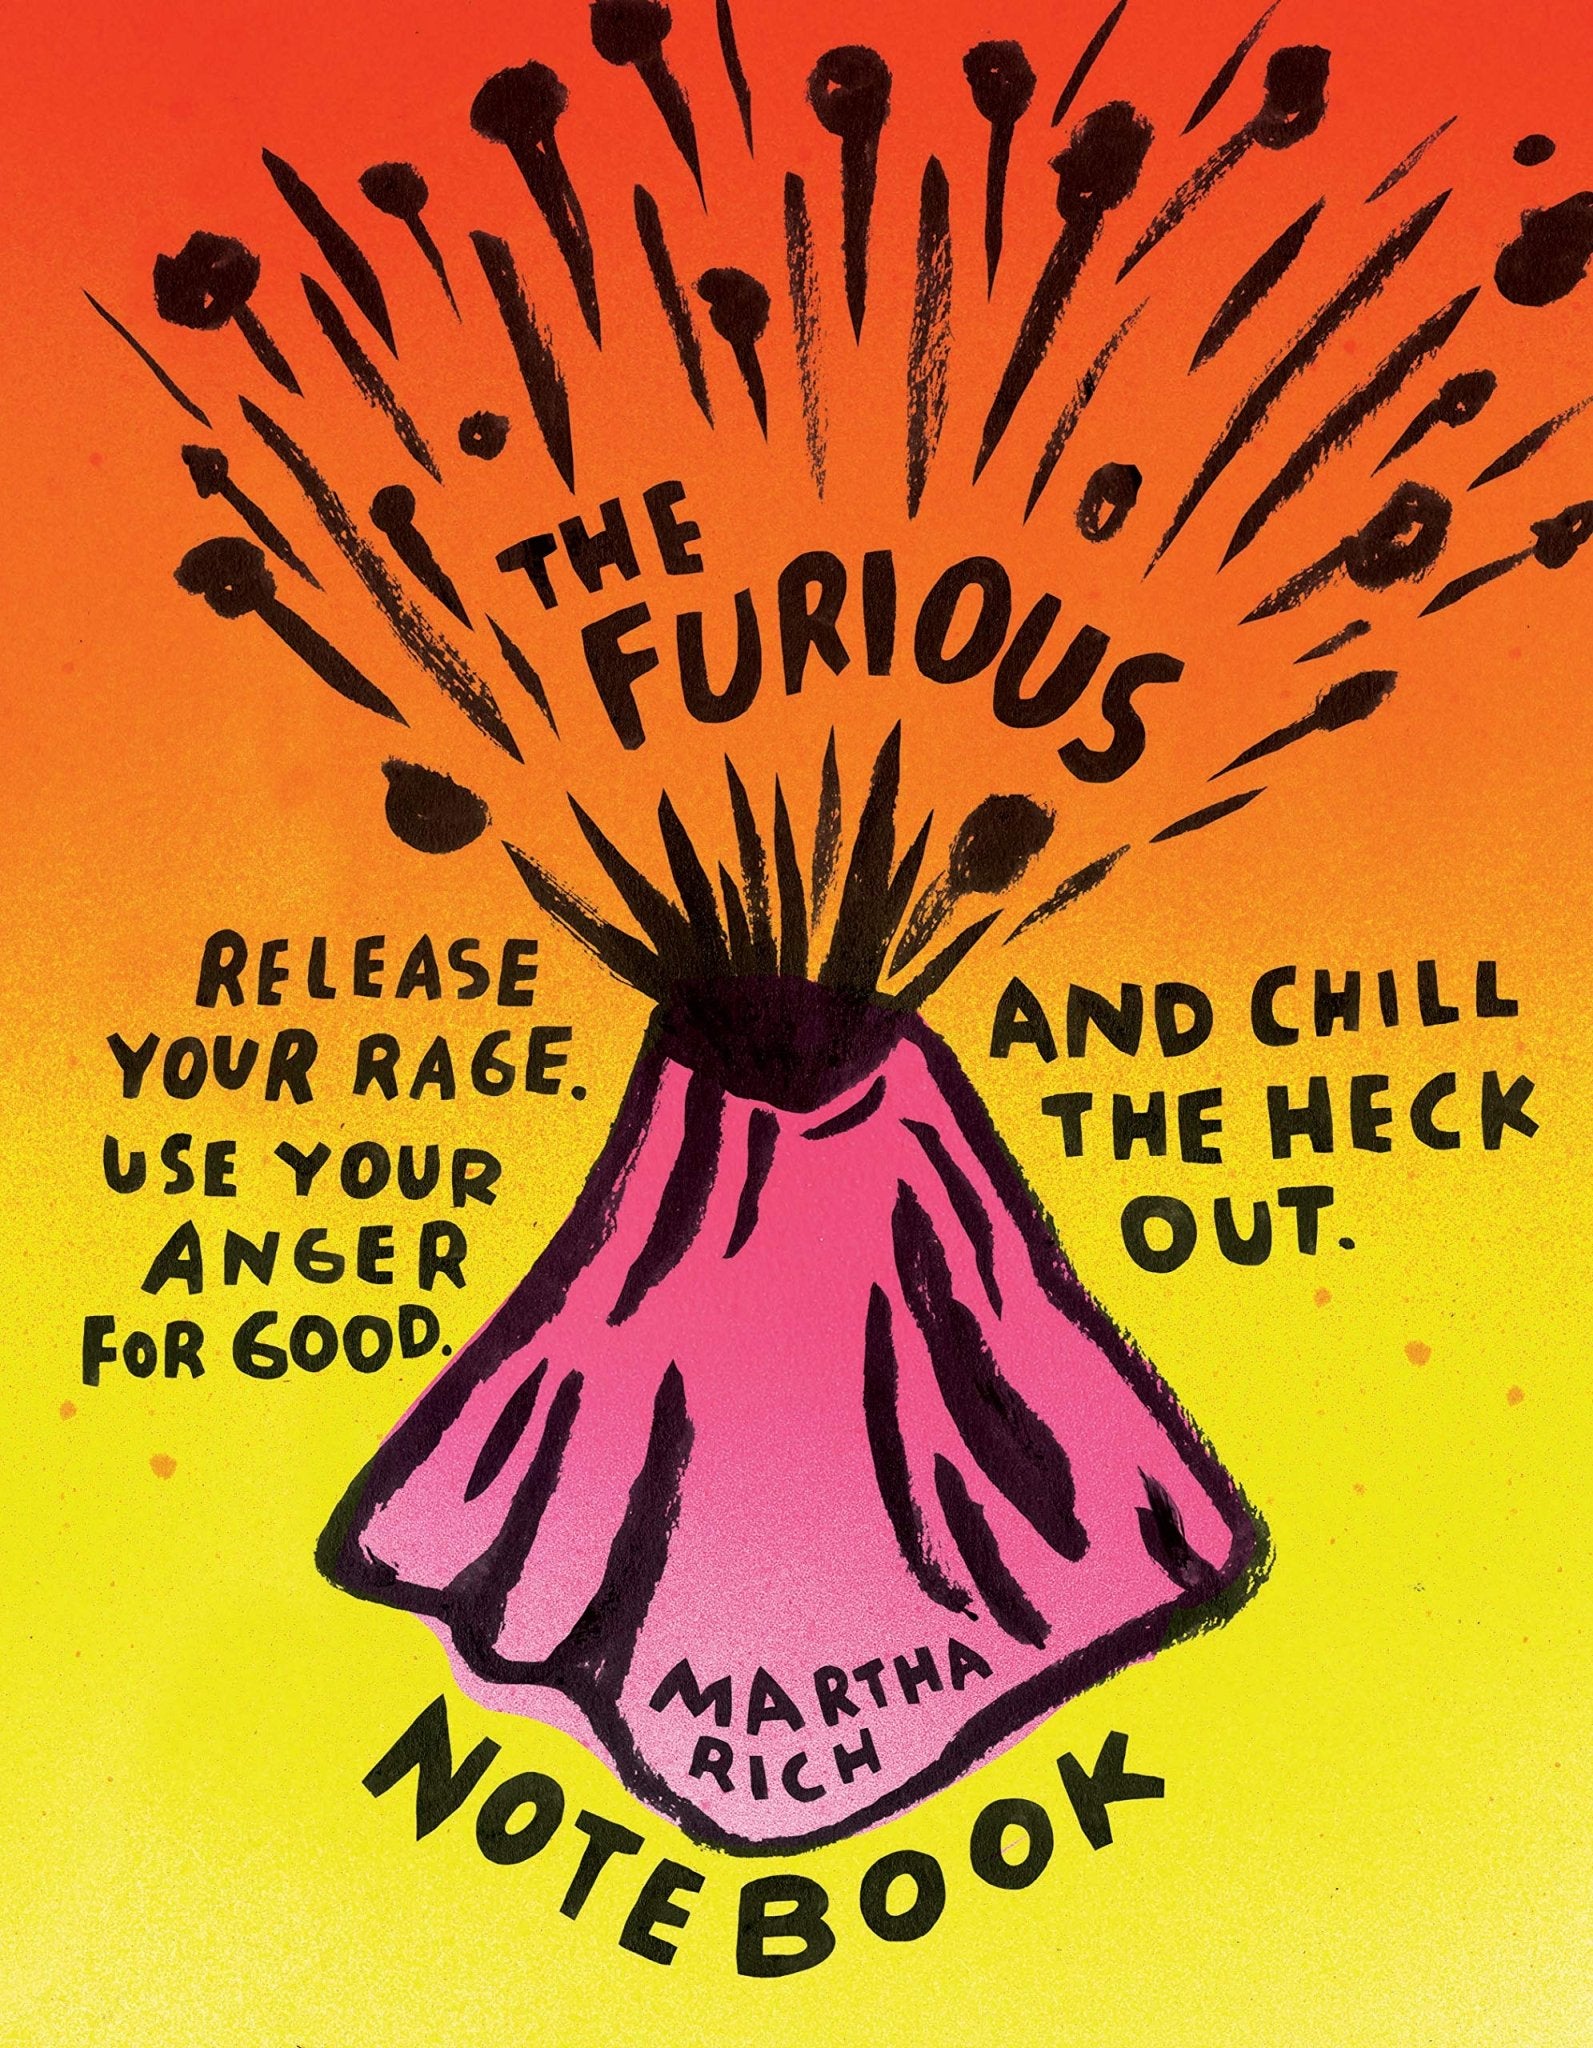 The Furious Notebook: Release Your Rage, Use Your Anger for Good, and Chill the Heck Out - Spiral Circle